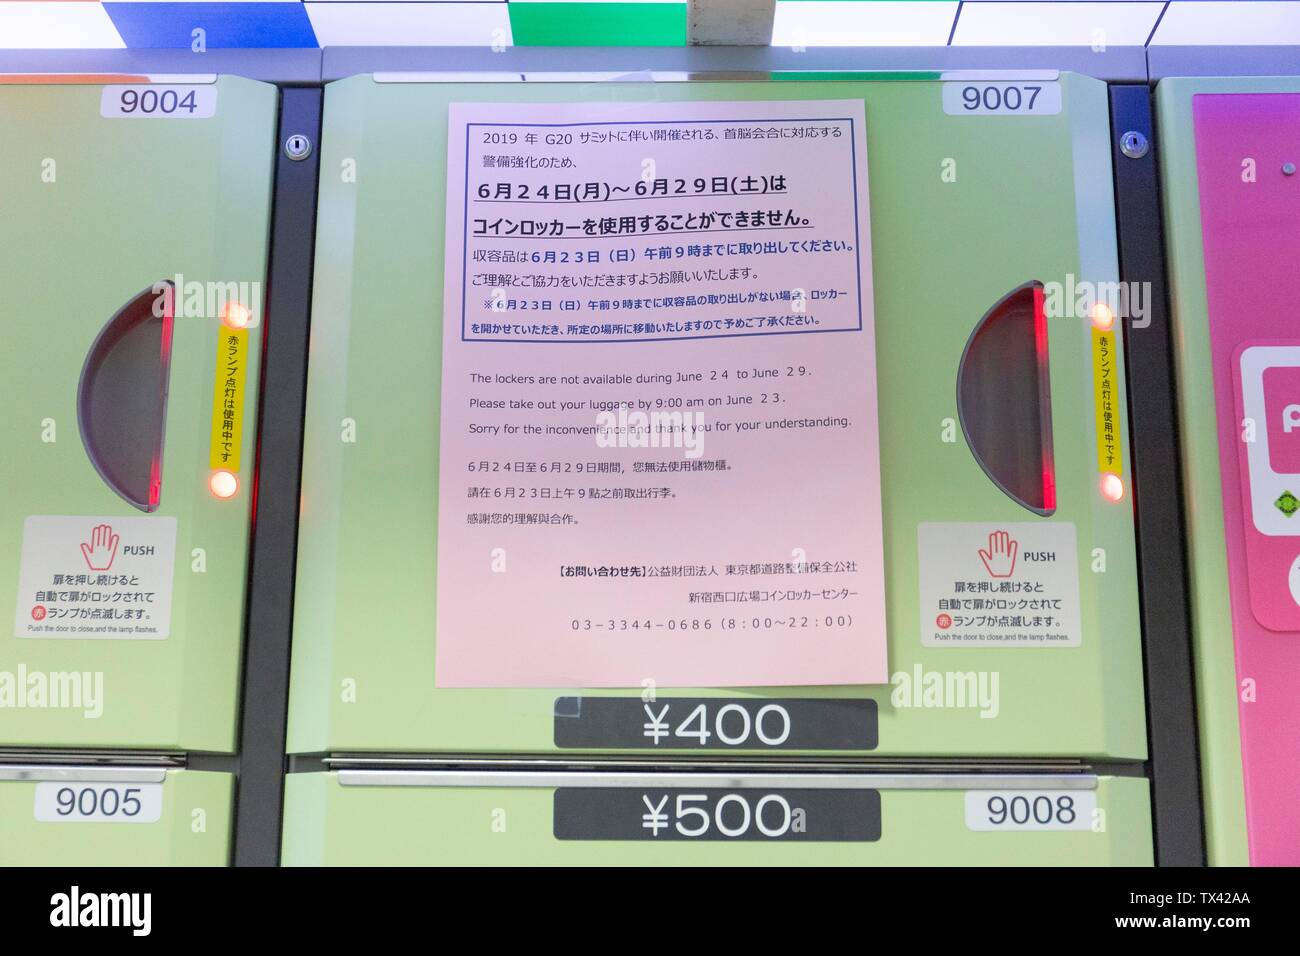 Tokyo Japan 24th June 19 A Sign In Japanese English Korean And Chinese Announce The Suspension Of Coin Locker Services In Shinjuku Station From June 24 To 29 The Signs Announce That